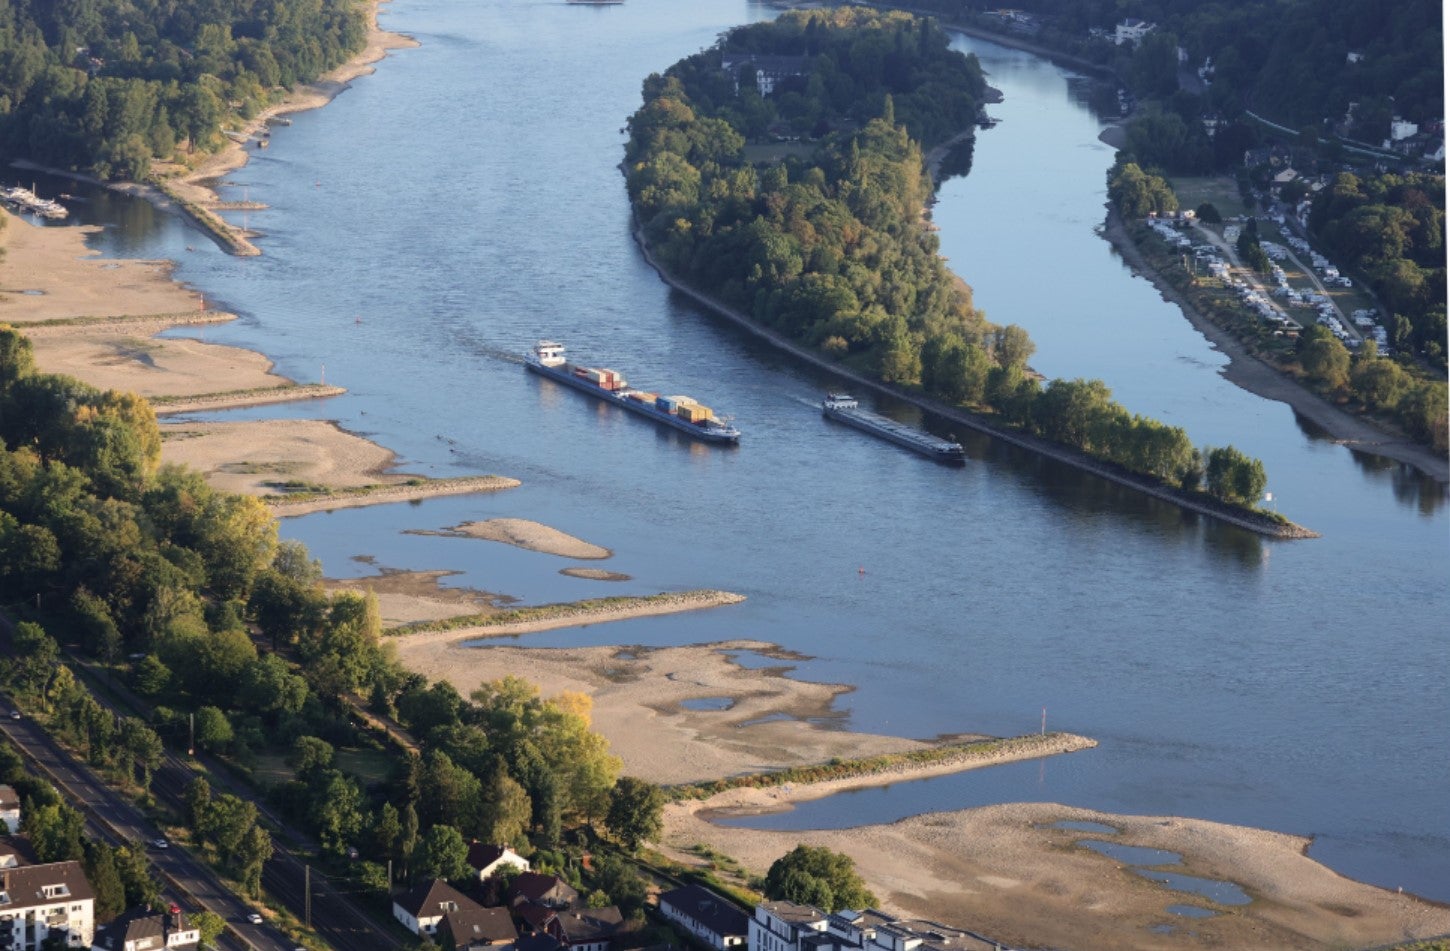 The ongoing hot weather and lack of rain have caused water levels on the Rhine and several other German rivers to fall